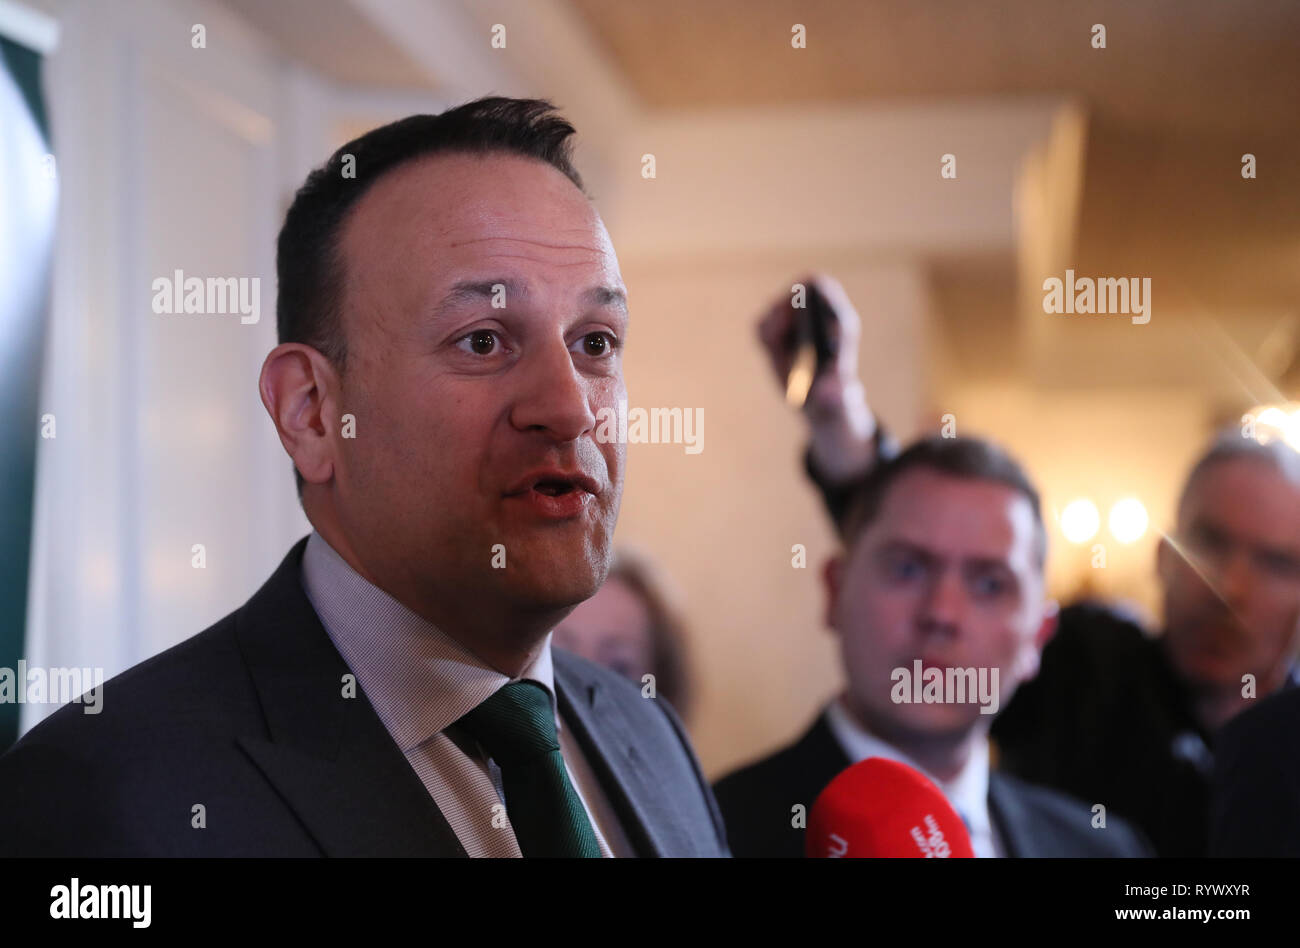 Taoiseach Leo Varadkar arriving at the Drake Hotel, Chicago where he will meet with emigrant support groups as he continues his visit to the United States. Stock Photo